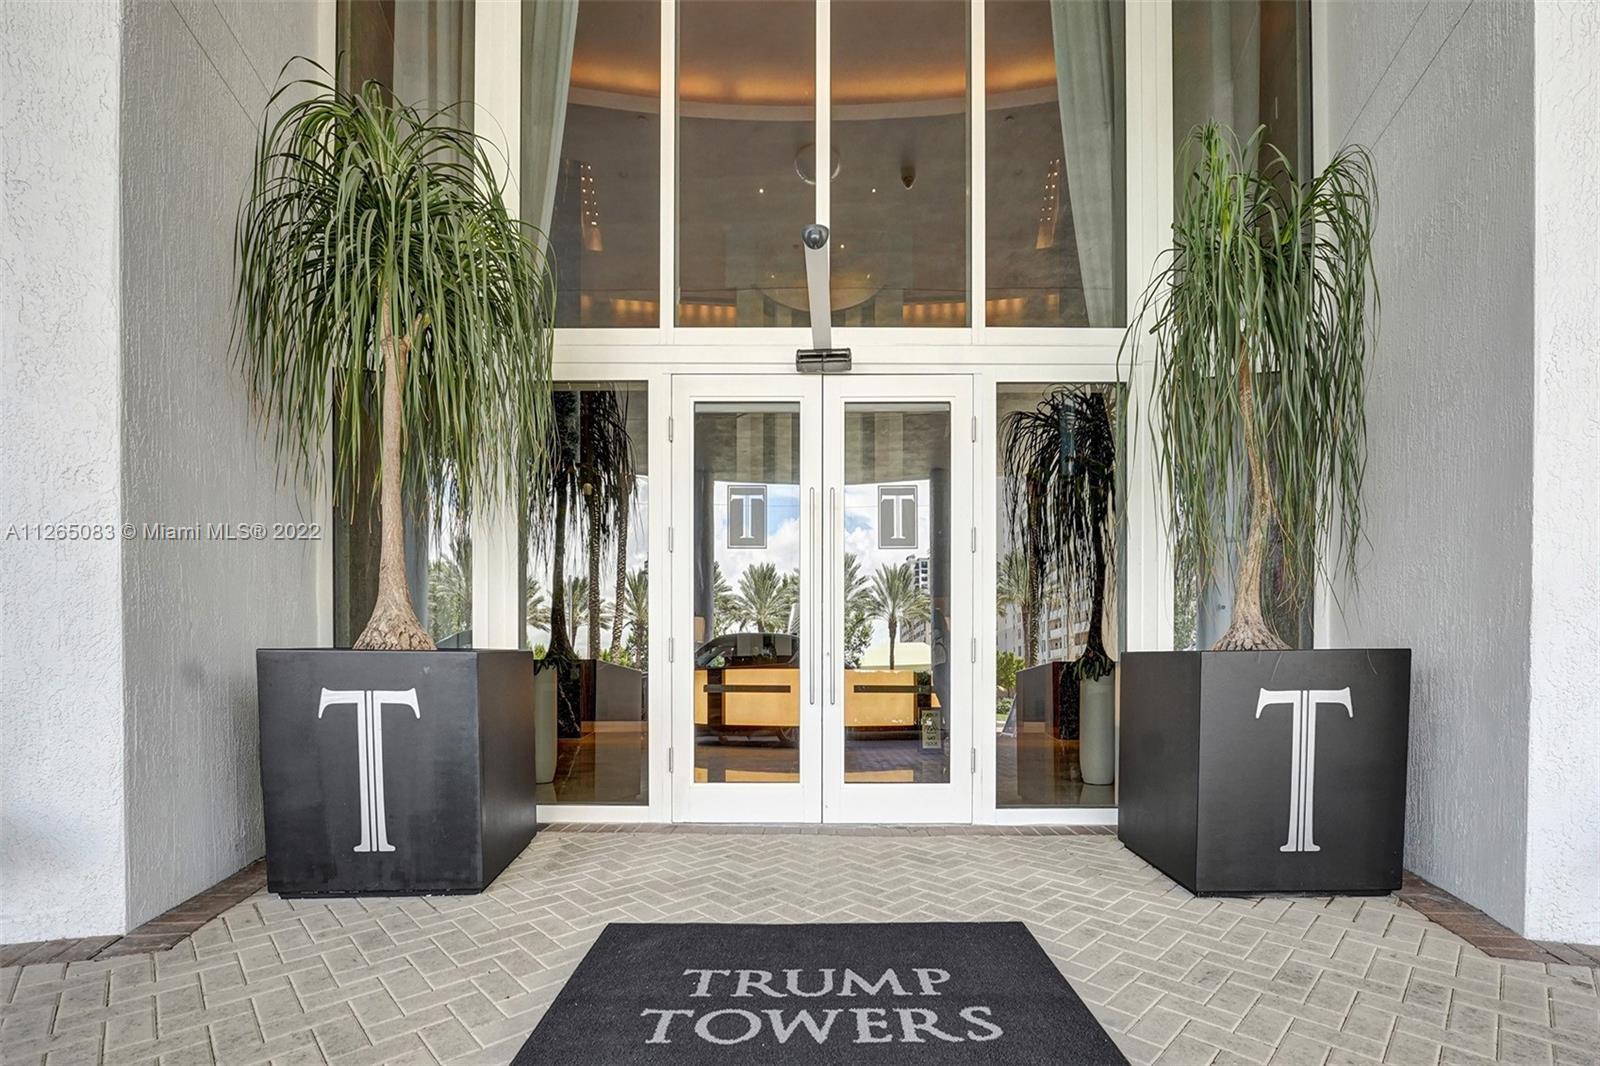 Photo 1 of Trump Towers I Apt 806 in Sunny Isles Beach - MLS A11265083